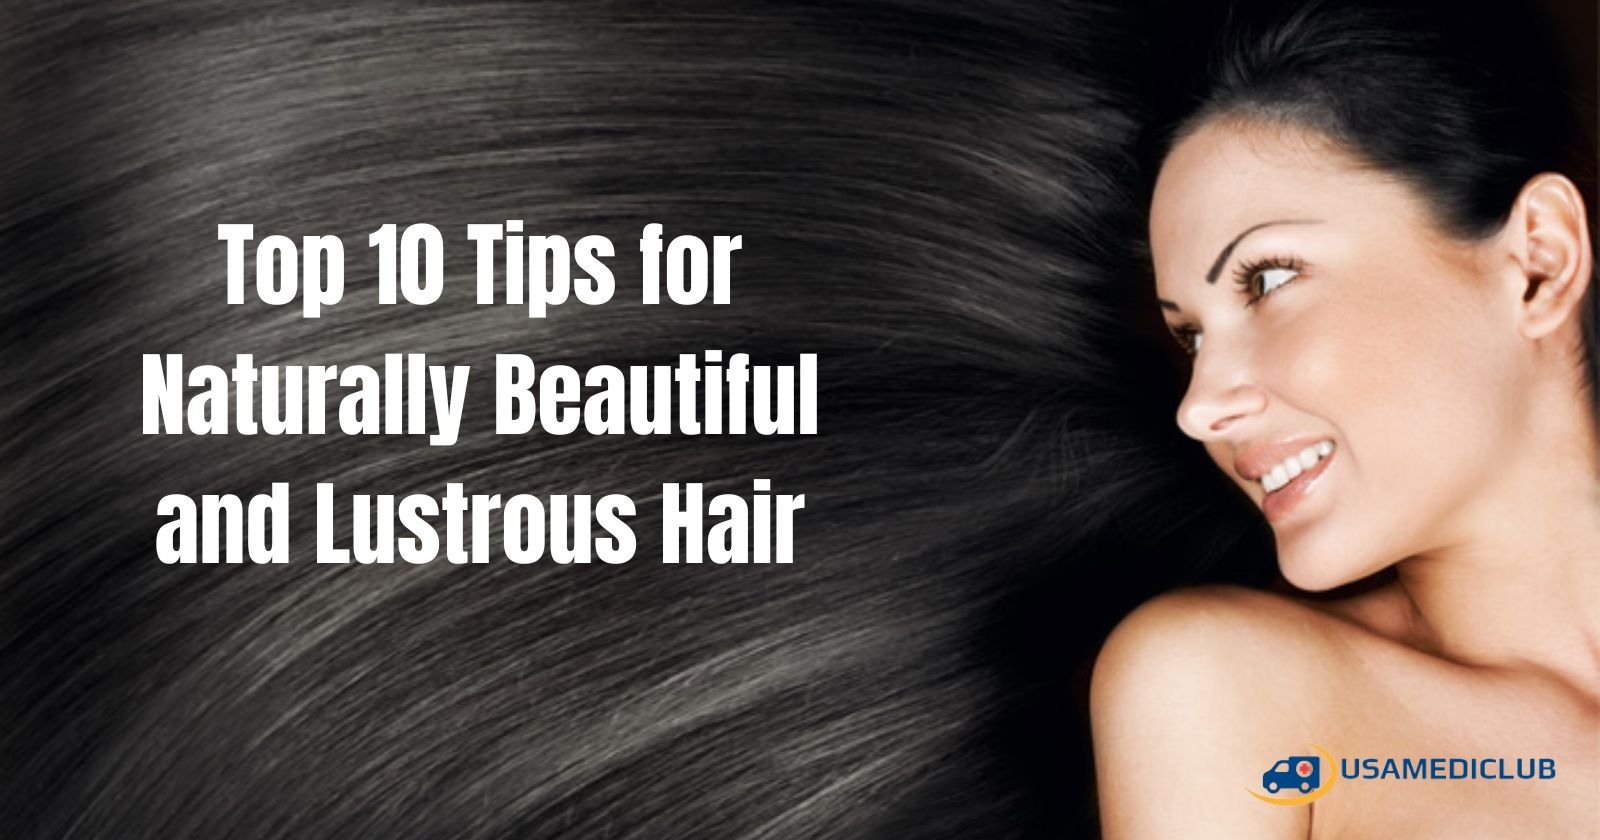 Top 10 Tips for Naturally Beautiful and Lustrous Hair